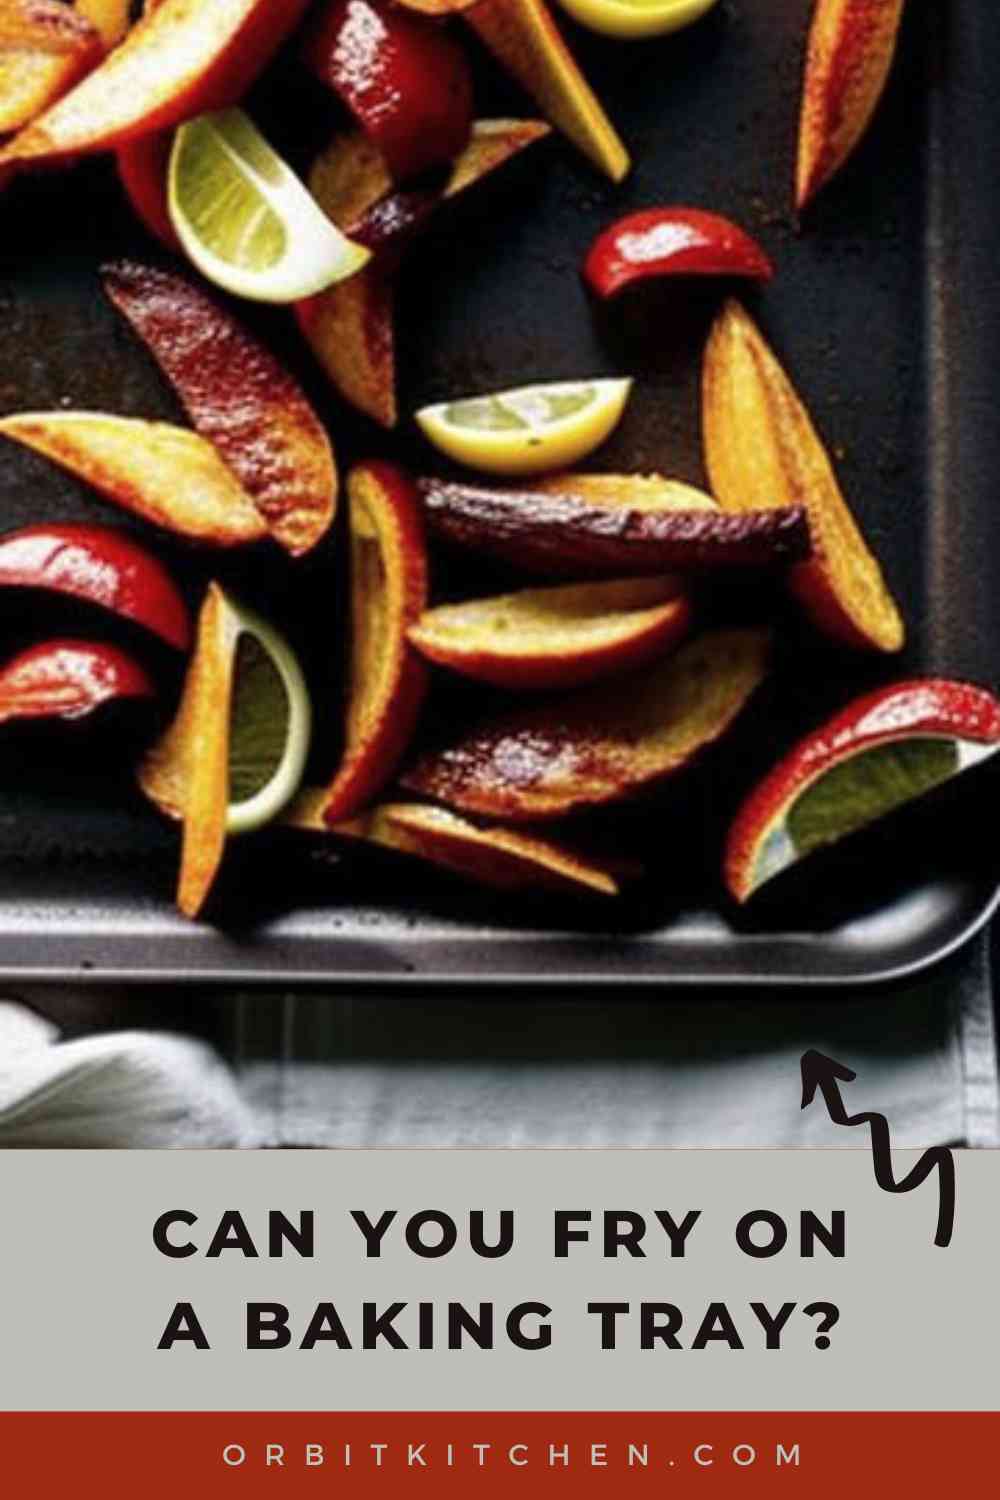 What Are the Foods That You Can Fry on the Baking Tray